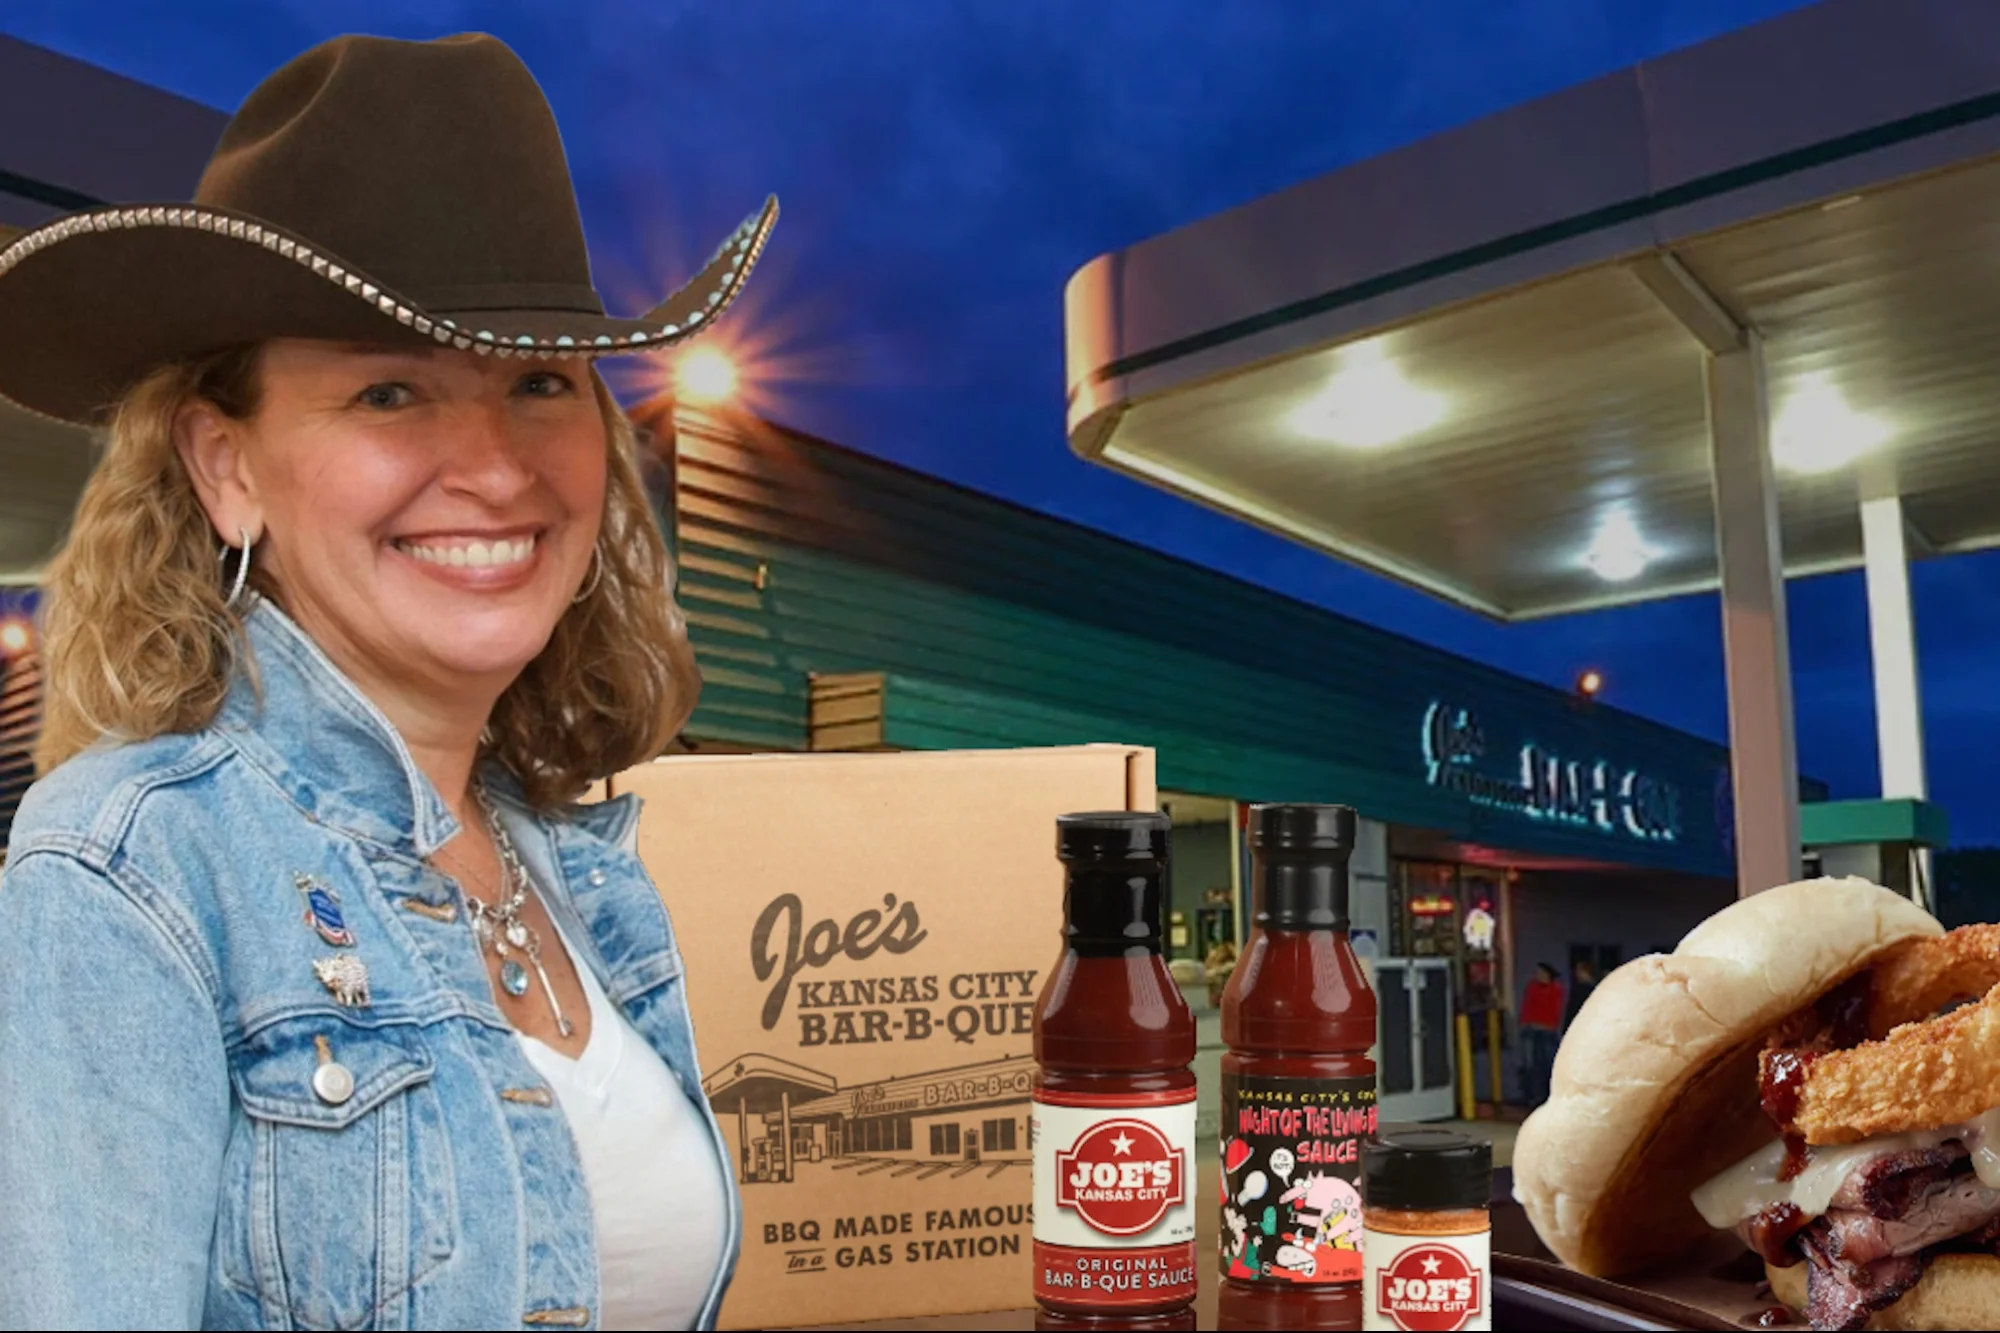 How This Couple Transformed a Gas Station Kitchen Into a Legendary BBQ Destination